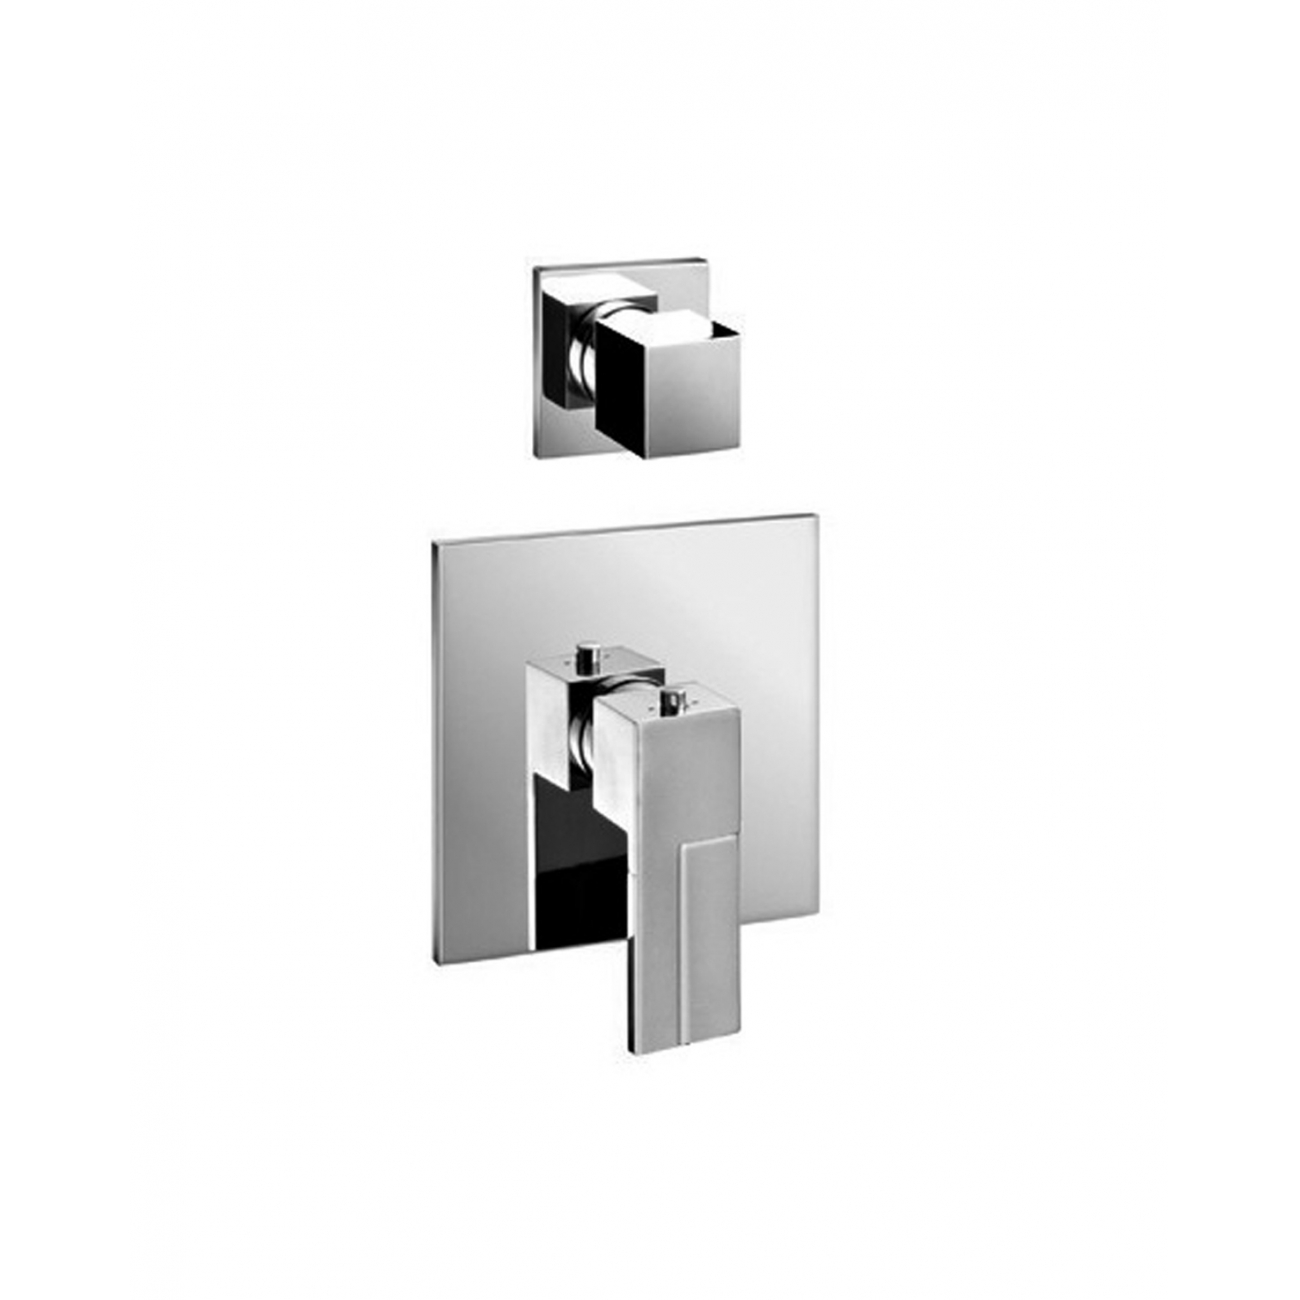 FANTINI AR38 BUILT-IN THERMOSTATIC SHOWER MIXER